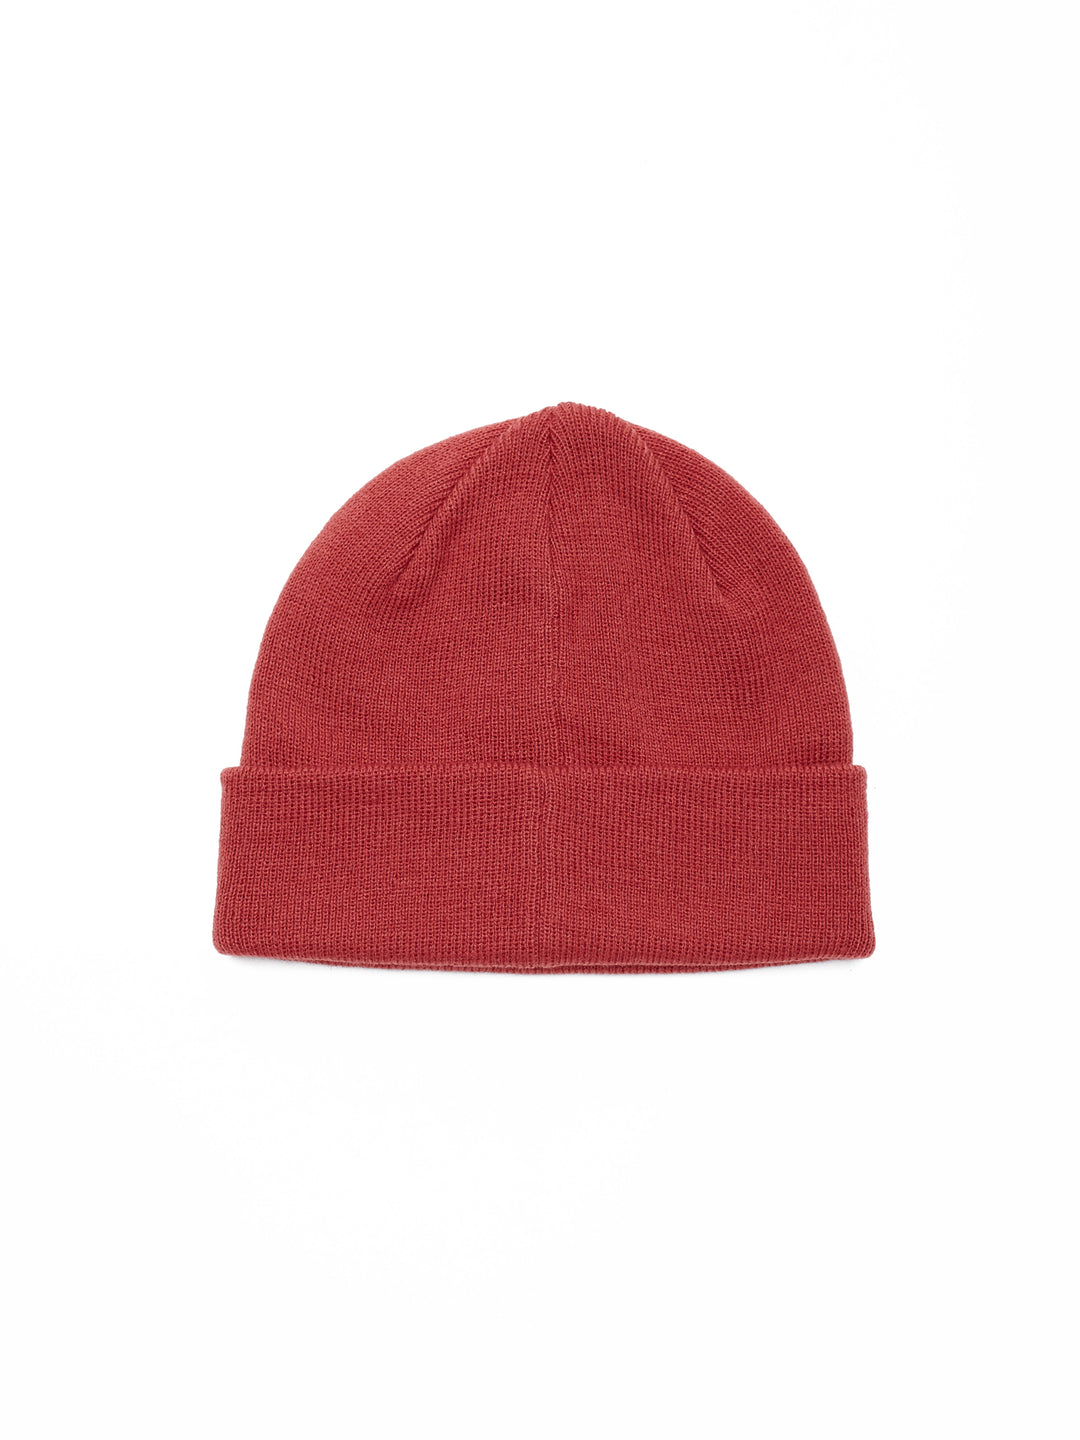 Briean Beanie | Mineral Red - West of Camden - Main Image Number 2 of 2